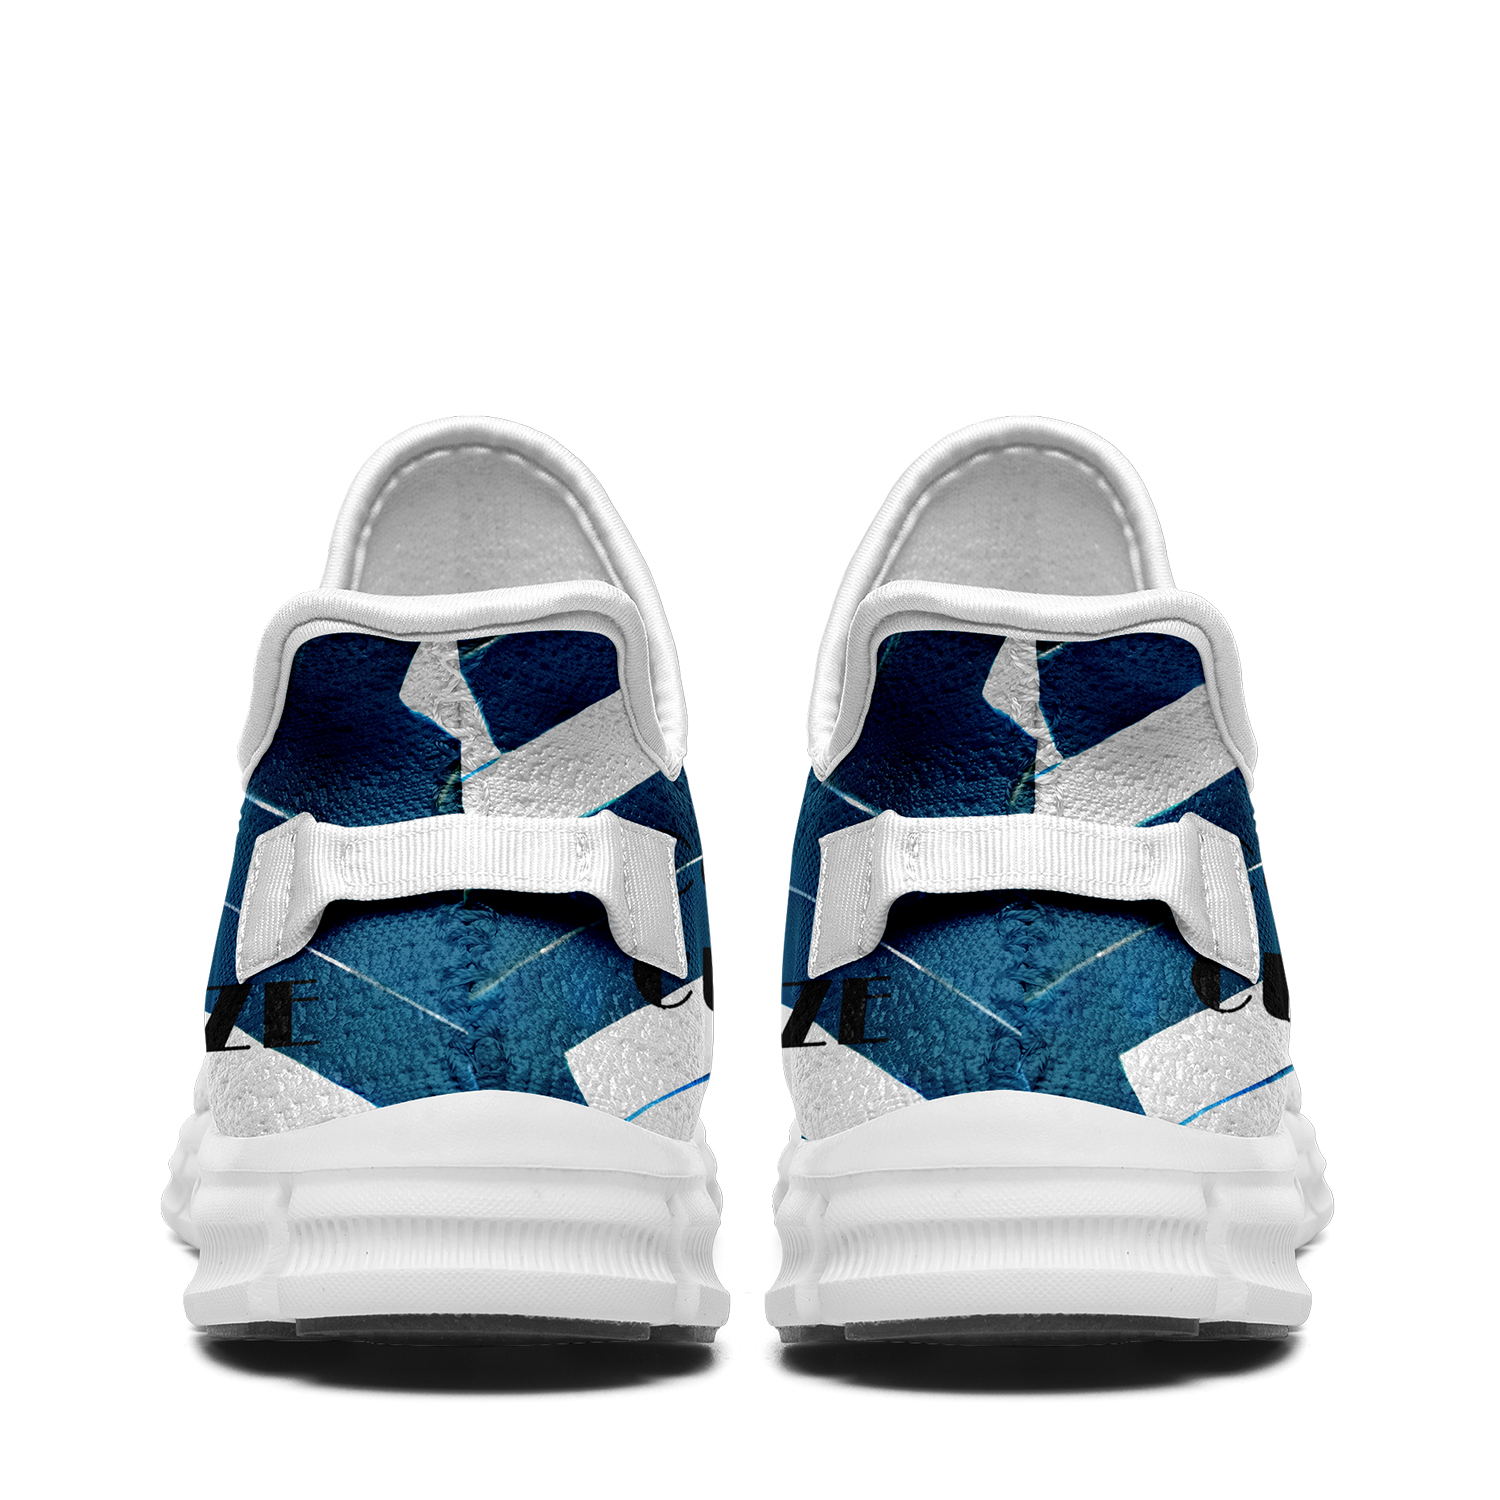 Customize Cheerleading Dans Shoes Personalized Design Printed Cheer Sport Shoes